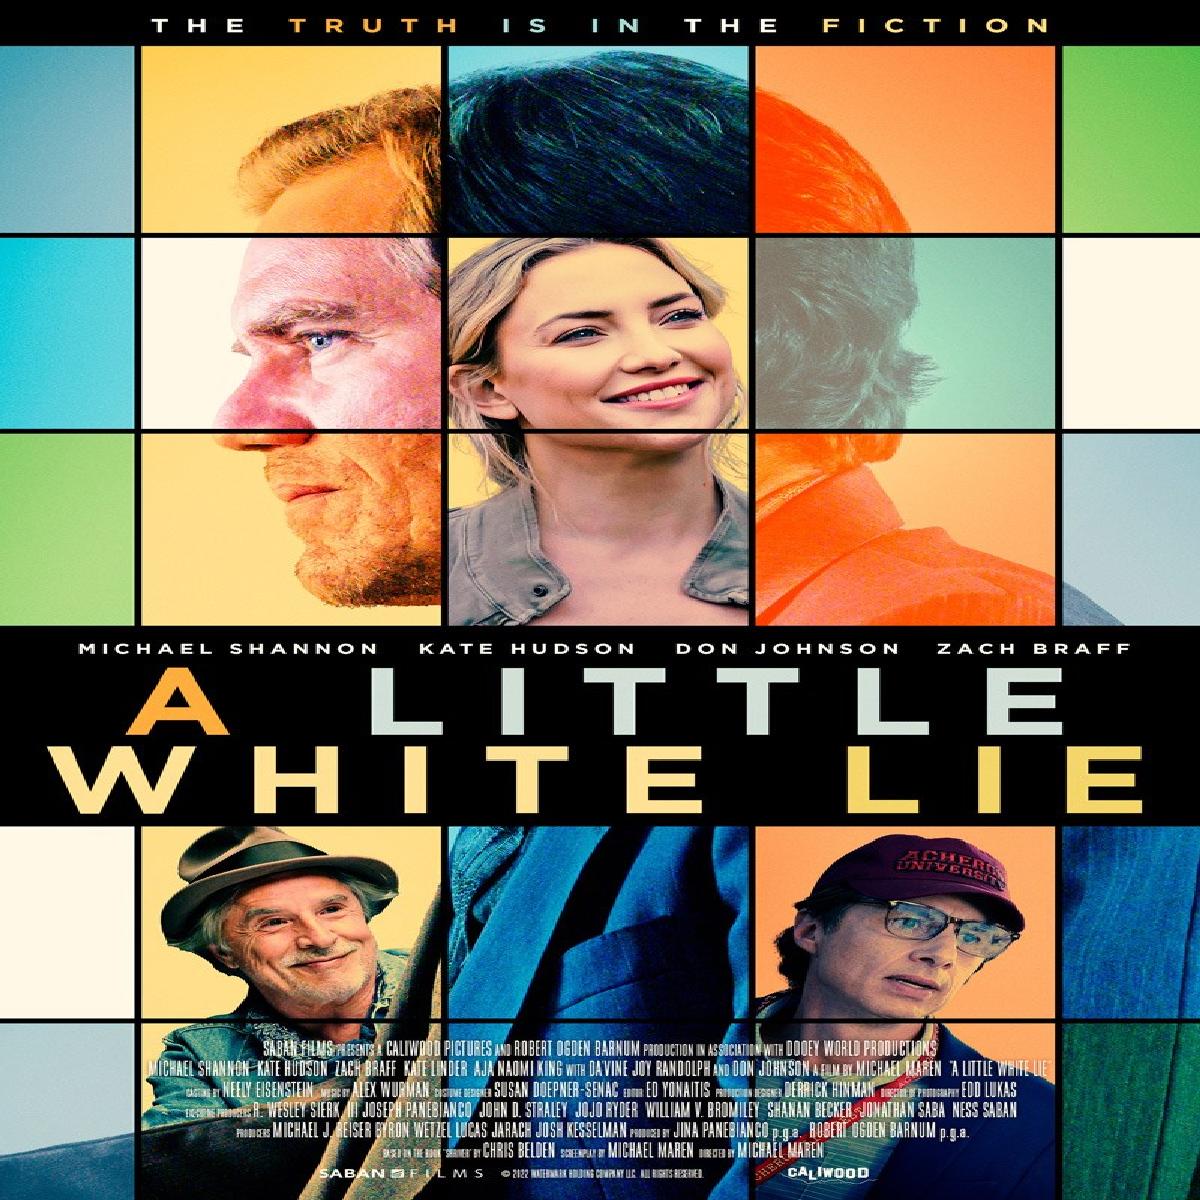 A Little White Lie Trailer Is Out